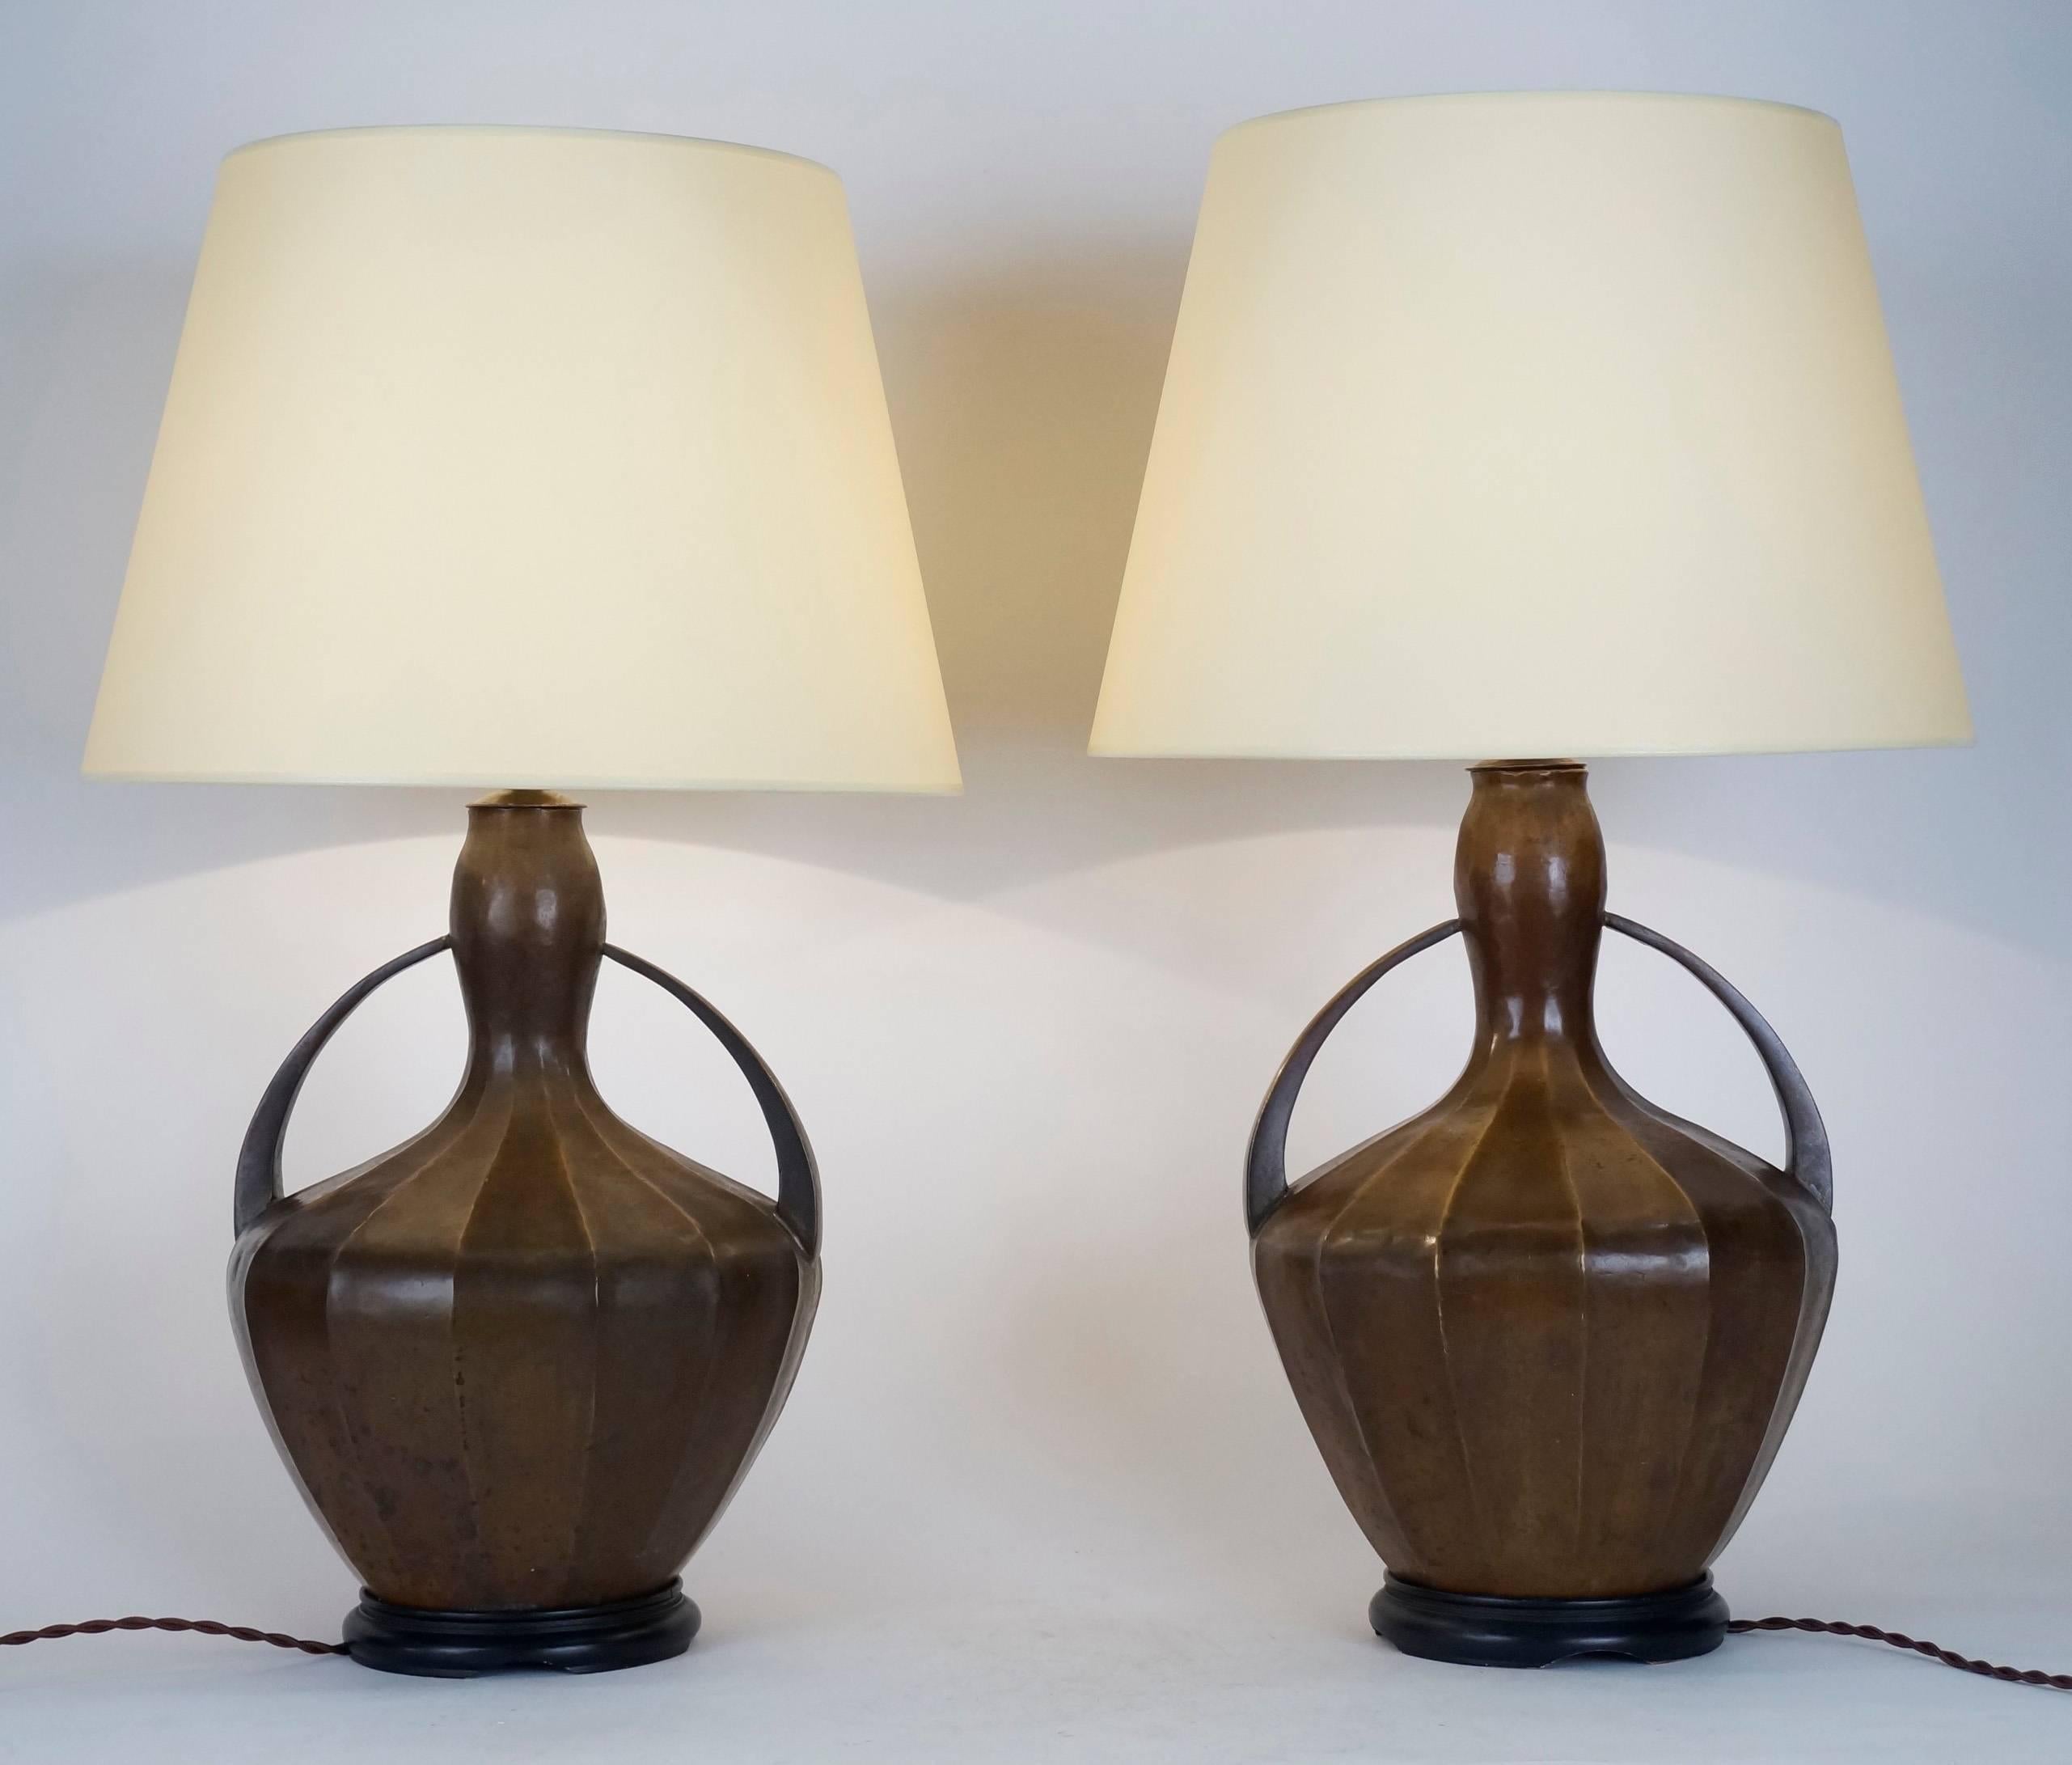 Pair of sheen brass table lamps on black-wood bases, custom-made fabric lampshade, rewired with twisted silk cord.
US standard plug on request.
Measures: Brass body height : 34 cm - 13.4 in.
Height with lampshade: 58 cm - 22.8 in.